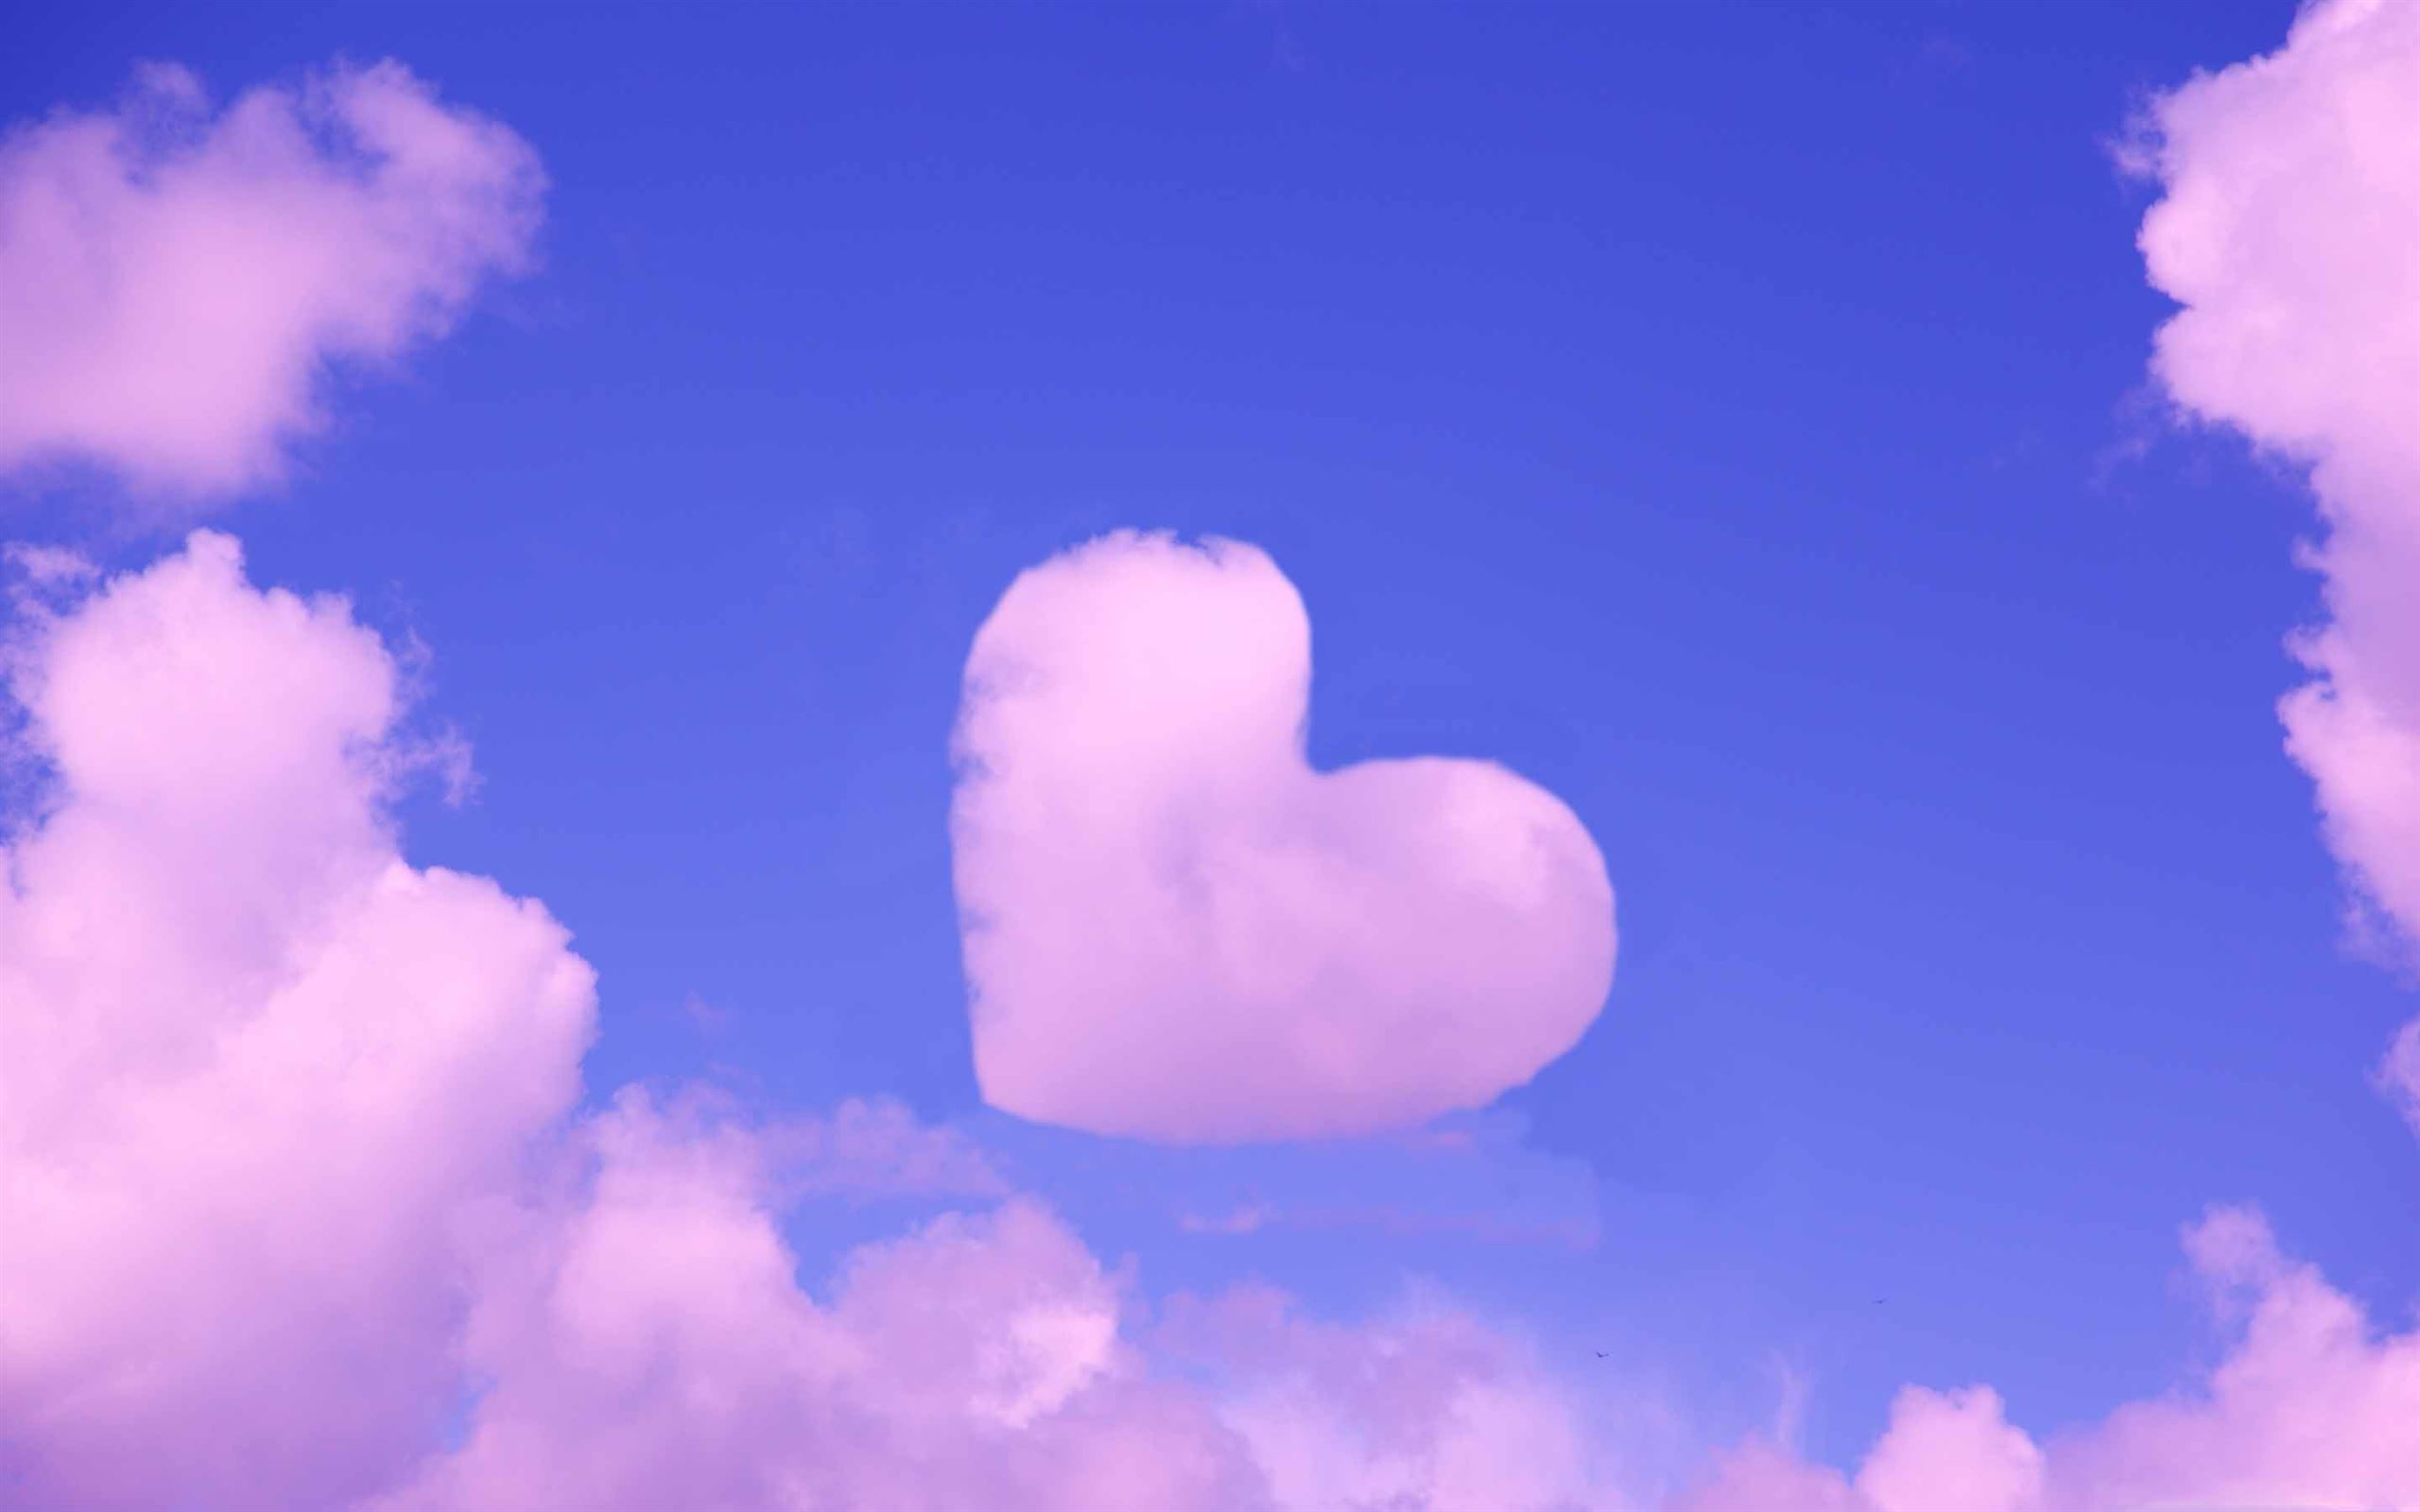 Aesthetic Clouds Mac Wallpapers